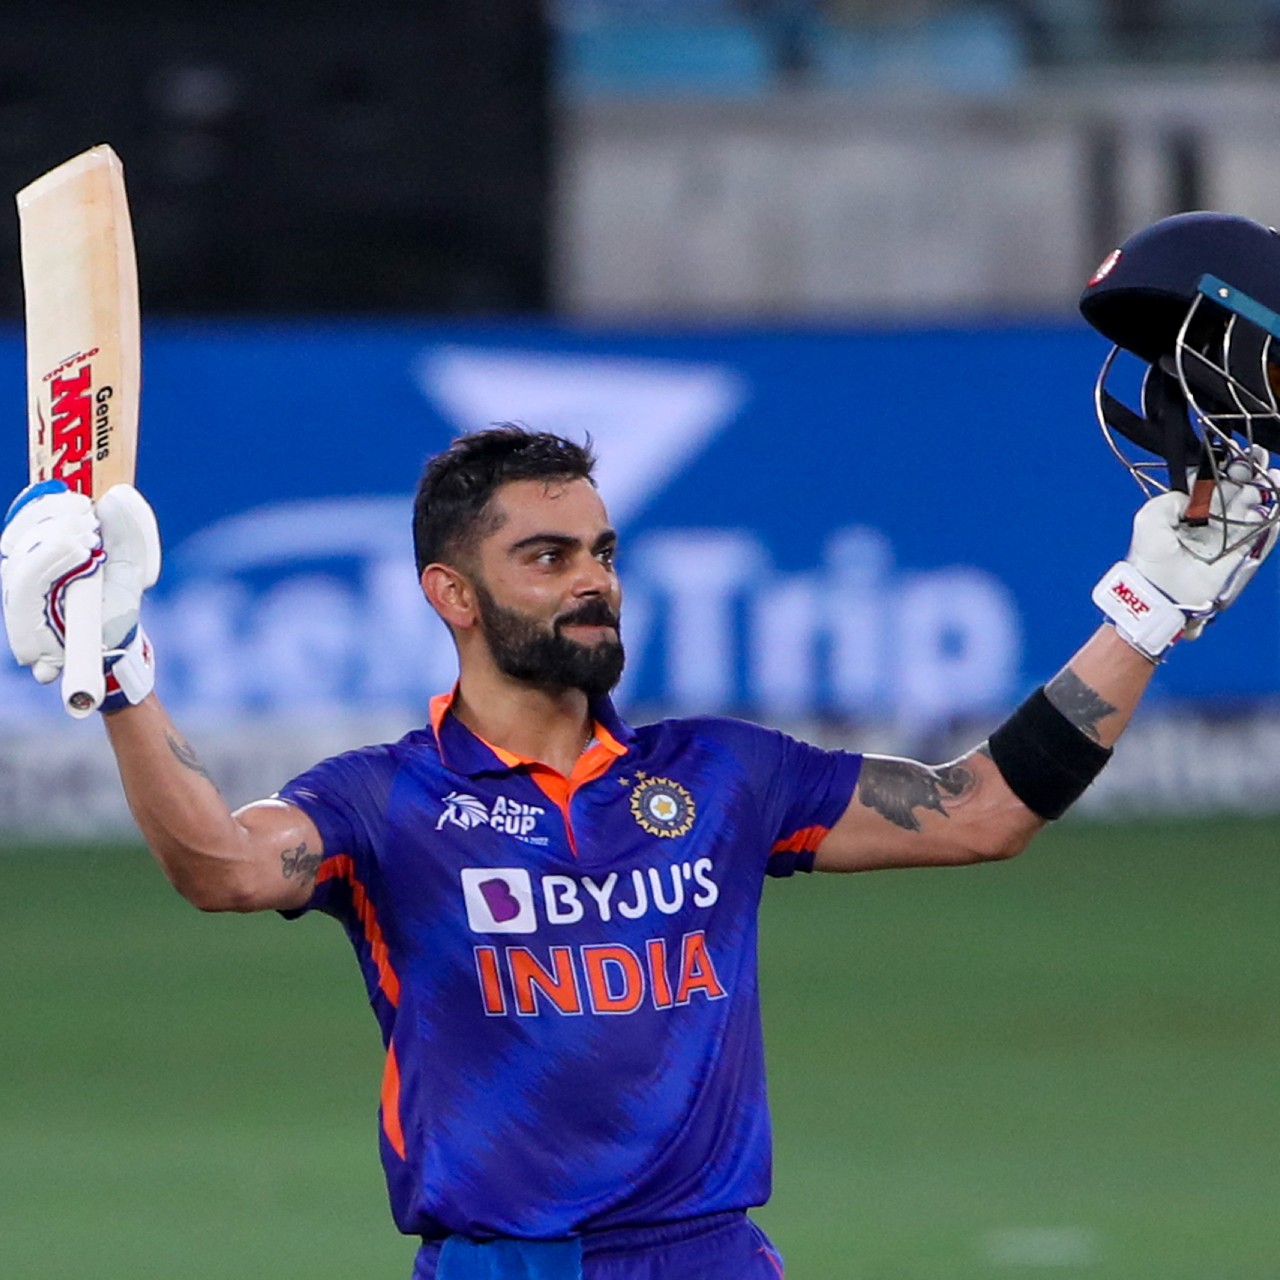 ‘Champion’ Virat Kohli should be go out on a high till his retirement, proclaims Shahid Afridi